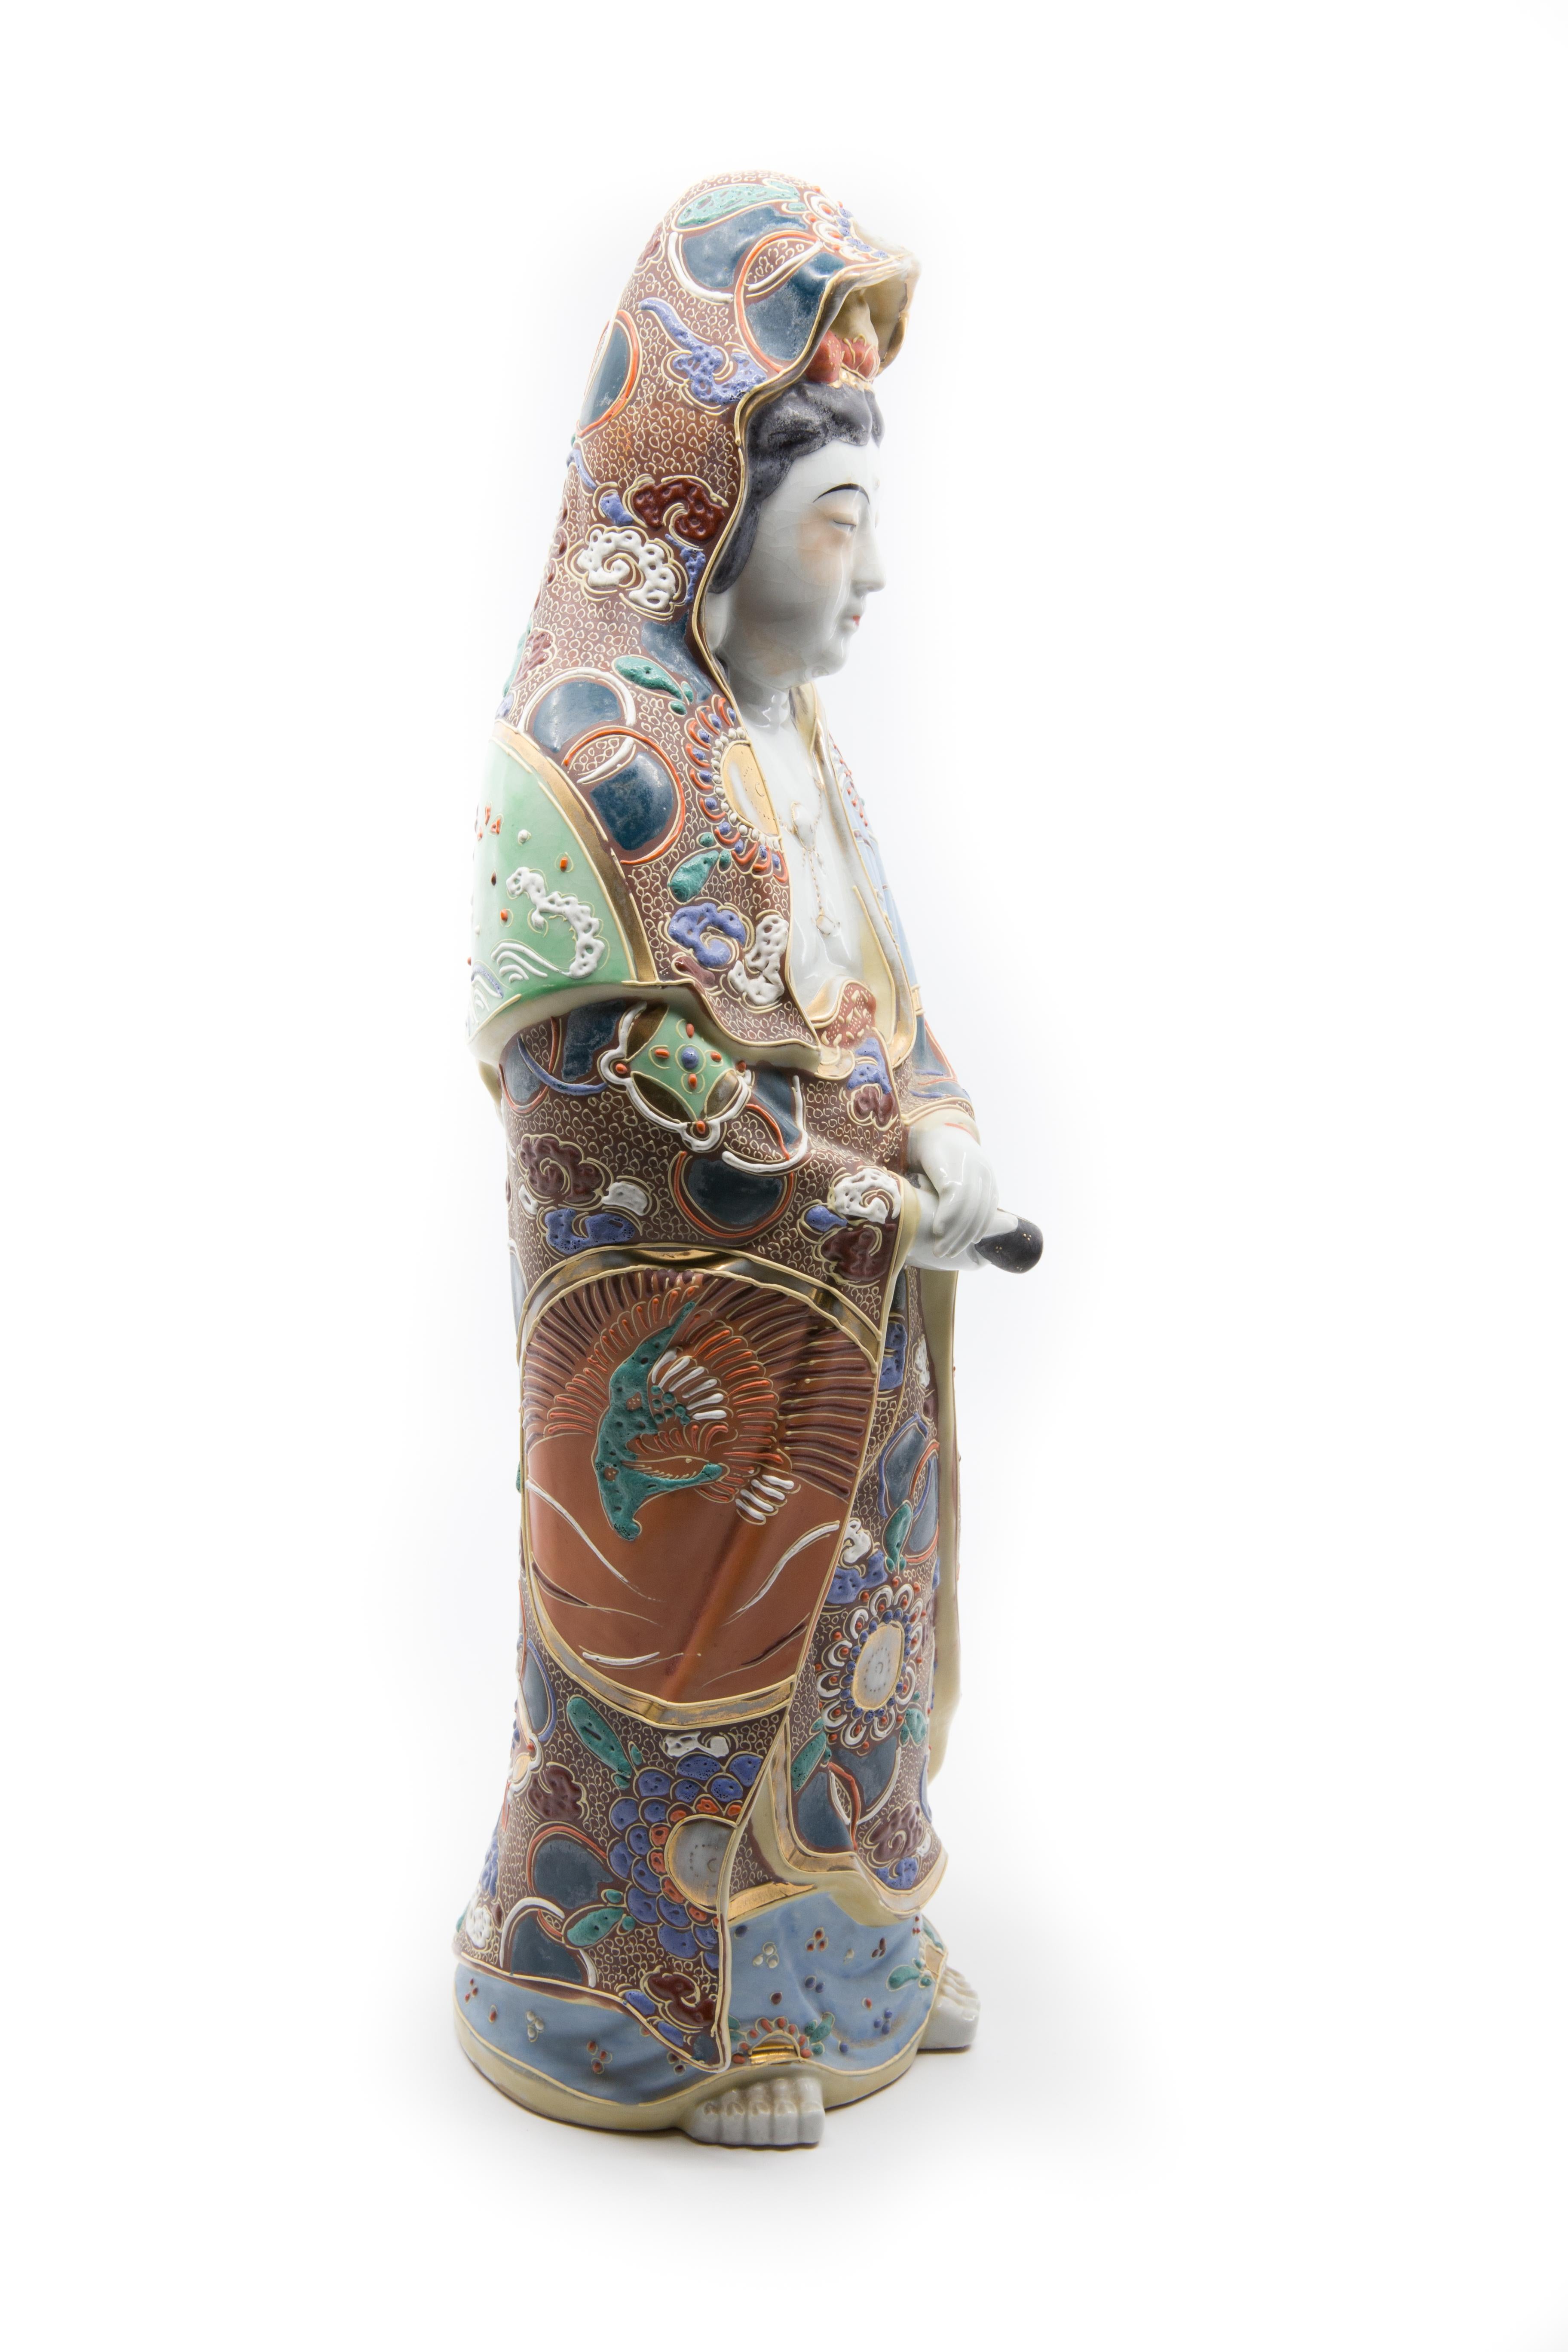 Offered is a tall circa 1910 Kutani porcelain decorated figure of a robed noble woman carrying a staff of office. The figure stands approximately 16” in height and is in good condition with no losses.